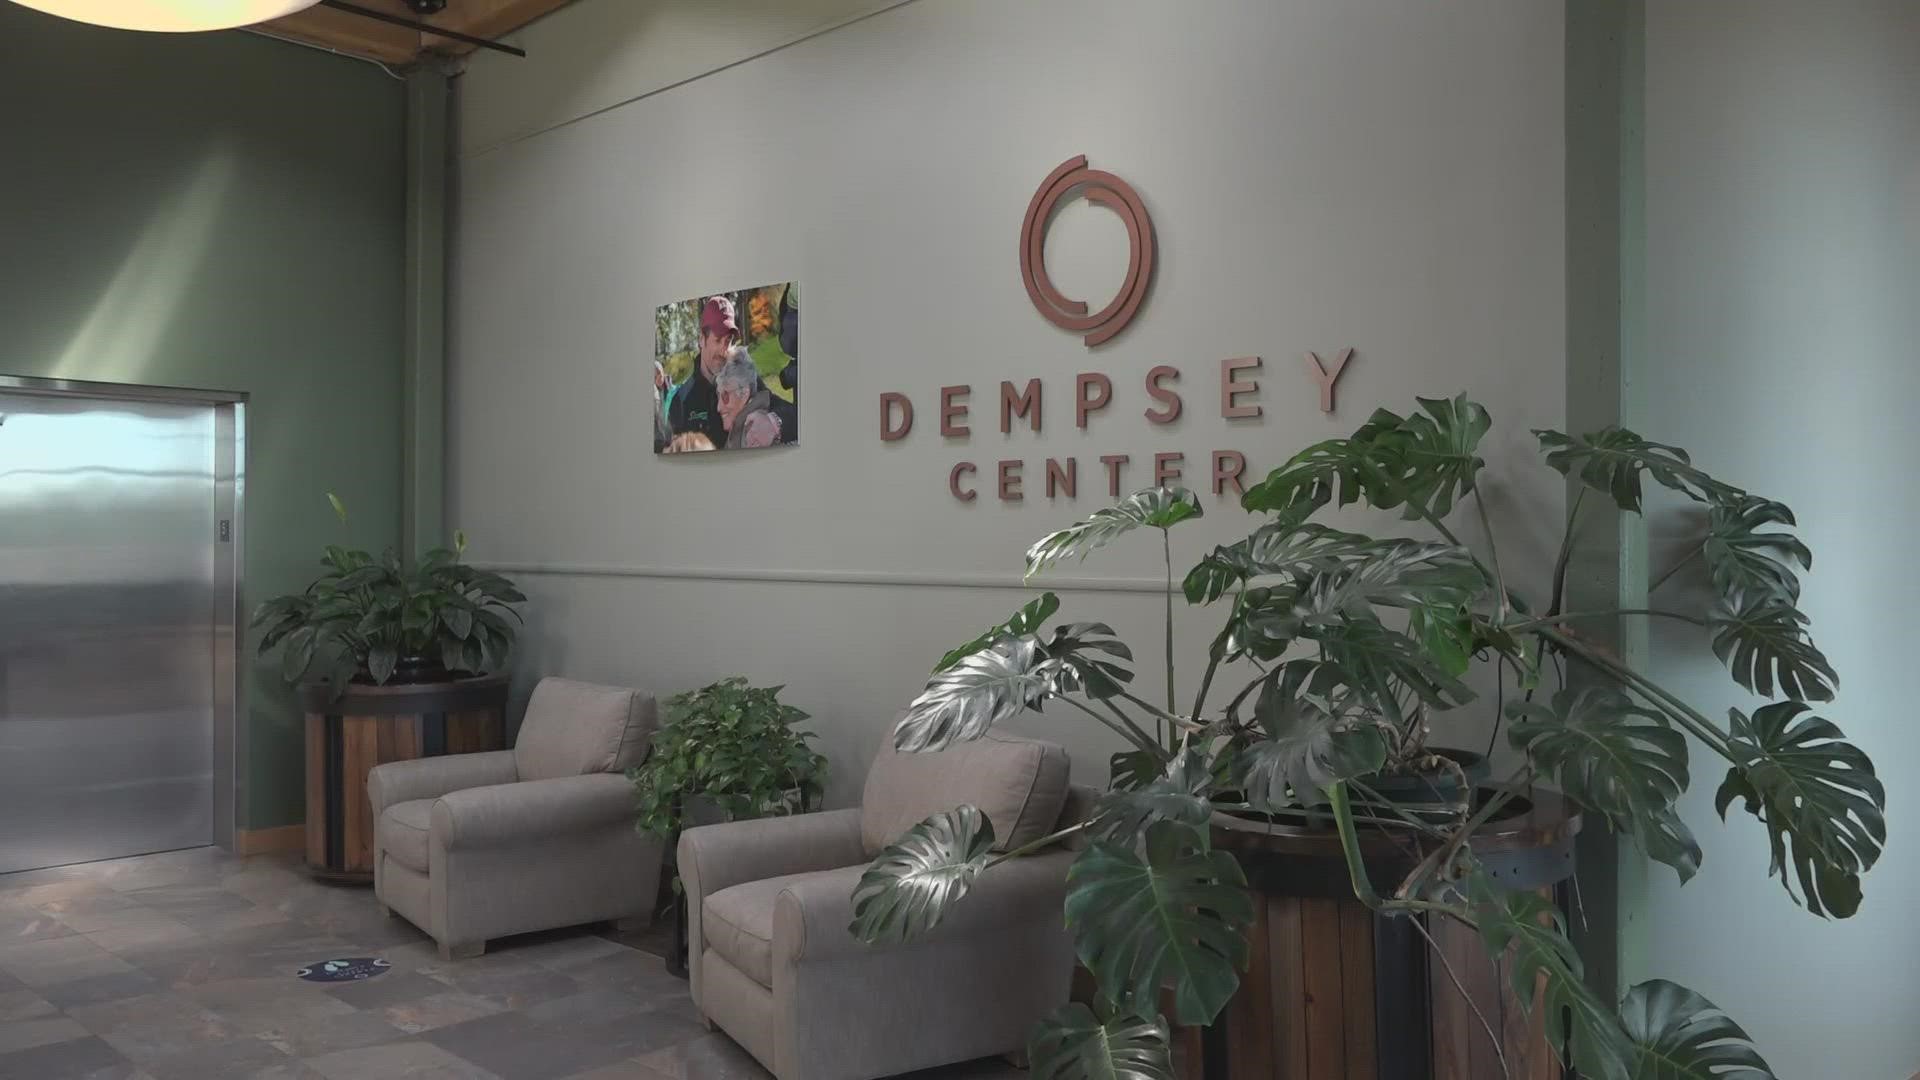 The Dempsey Center has more than 800 active clients right now, and 29 of them are out of state, using the virtual platform called 'Dempsey Connects'.